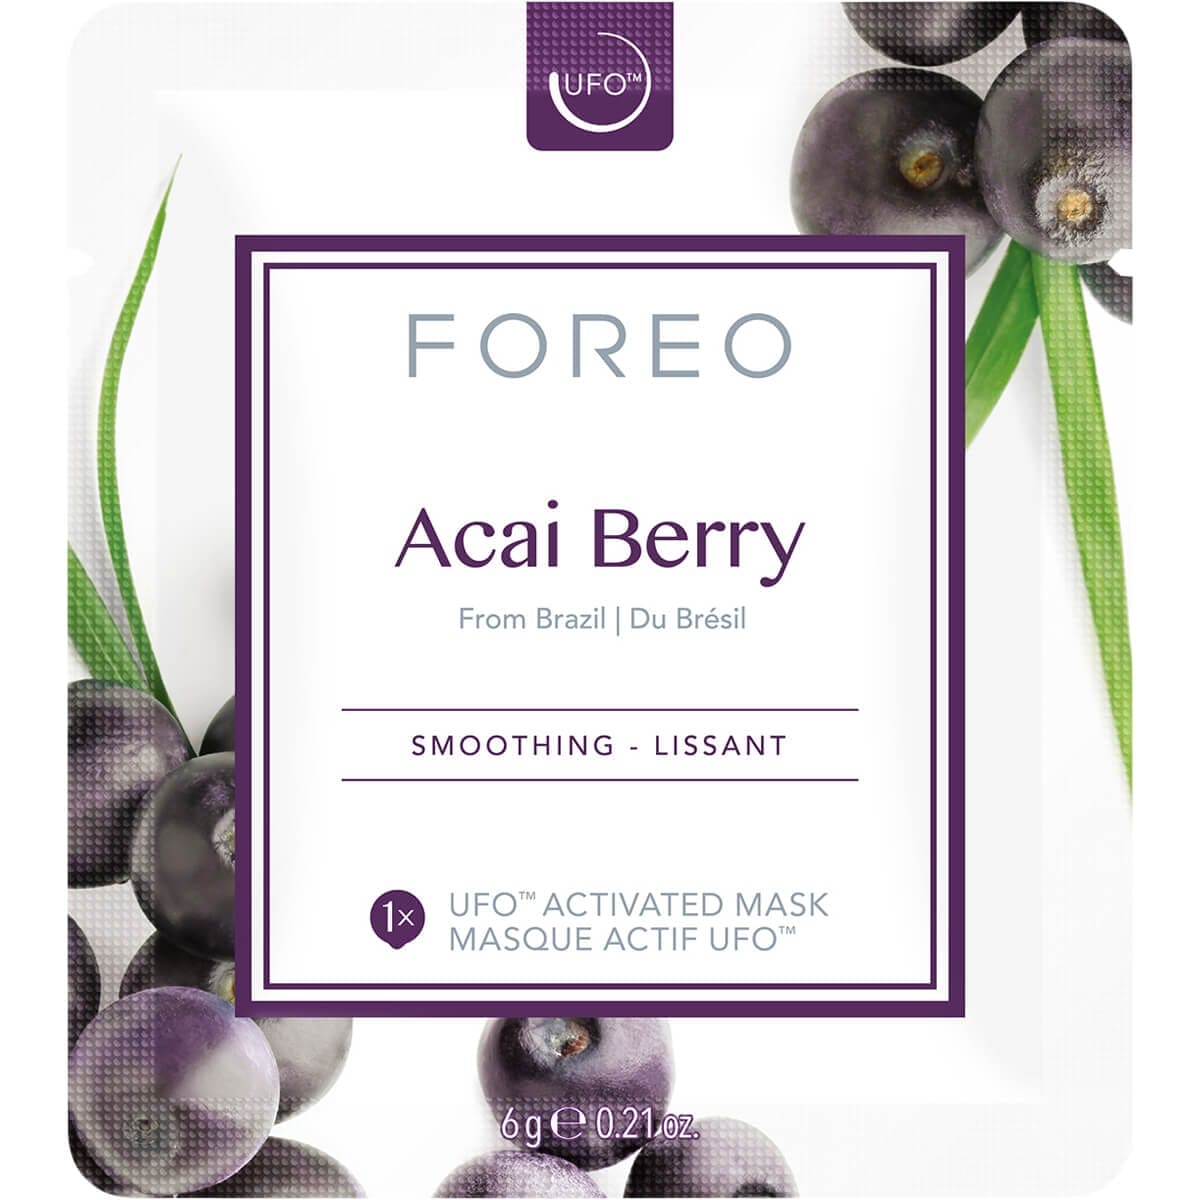 FREE FOREO Farm to Face Collection Mask - Acai Berry - Worth £21